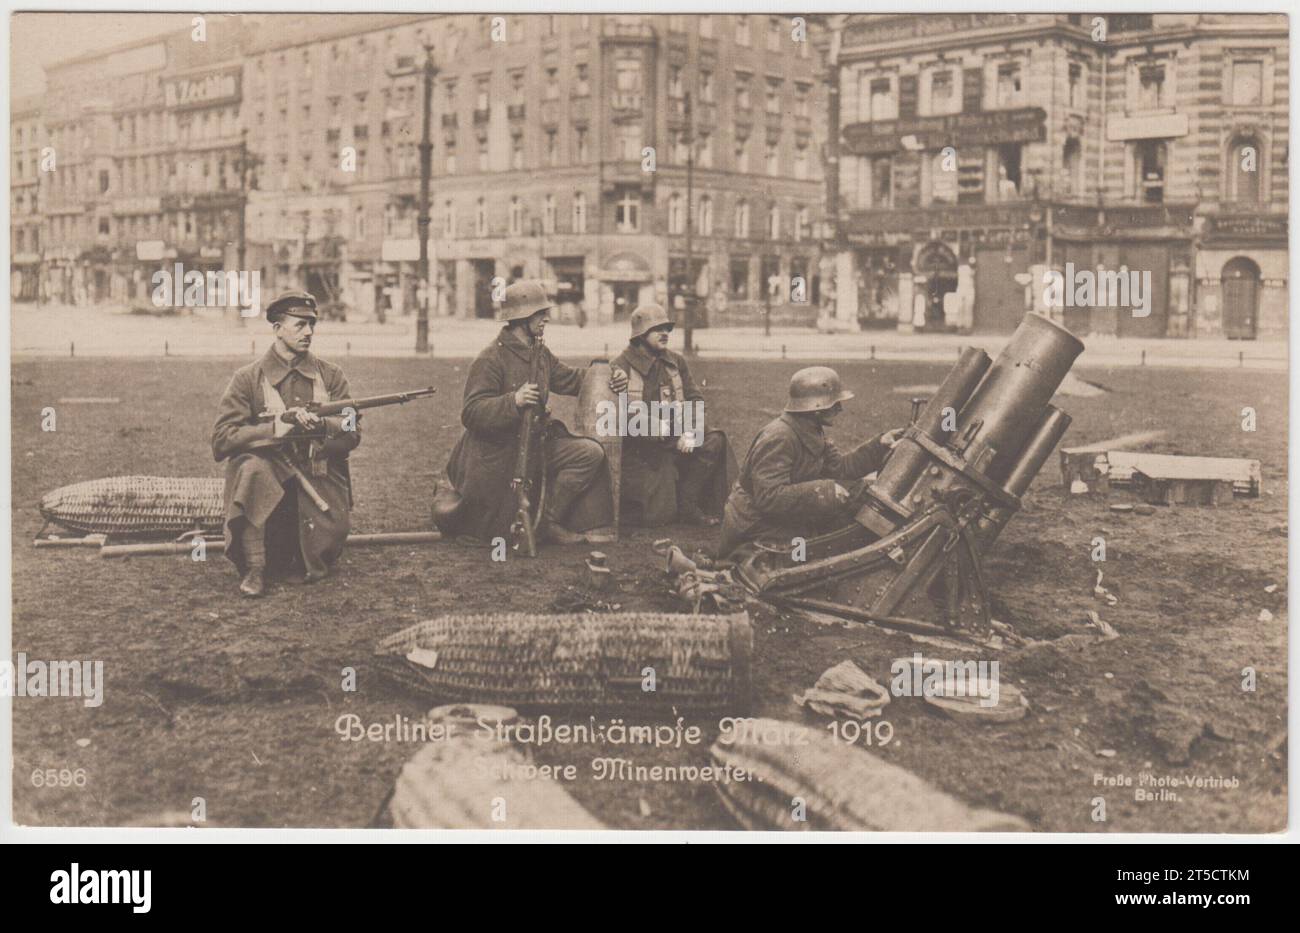 'Berliner straßenkämpfe, März 1919. Schwere Minenwerfer' / 'Berlin street fighting, March 1919. Heavy mortars'. Four German soldiers on a grassed area by a Berlin street, three have rifles, one is operating a large mortar. Shells are on the grass around them, in wicker covers. The photograph shows street fighting during the 1919 March Battles in Berlin Stock Photo